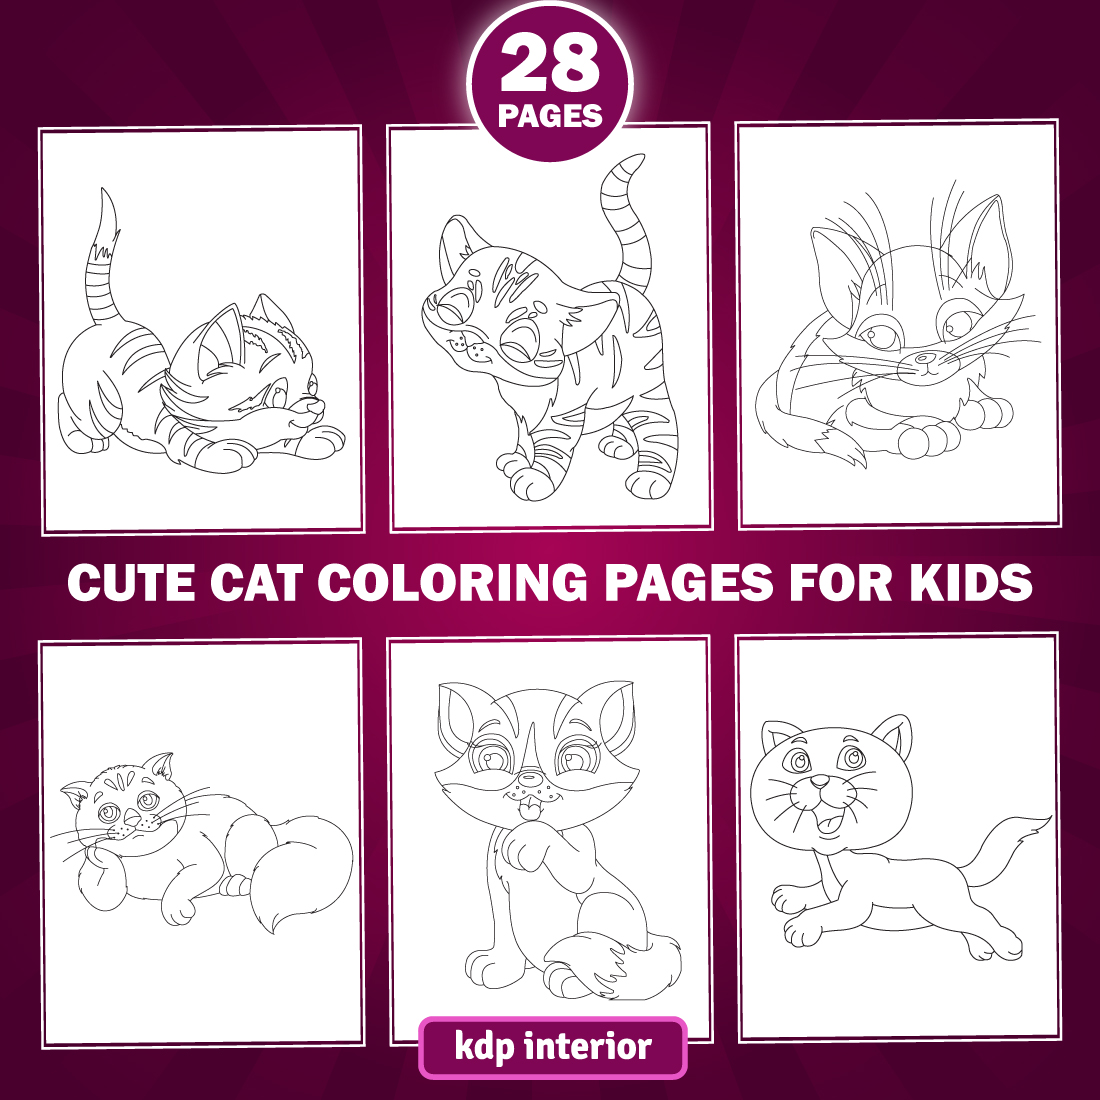 28 Cute Cat Coloring Pages for KDP Interior for Kids and Adult cover image.